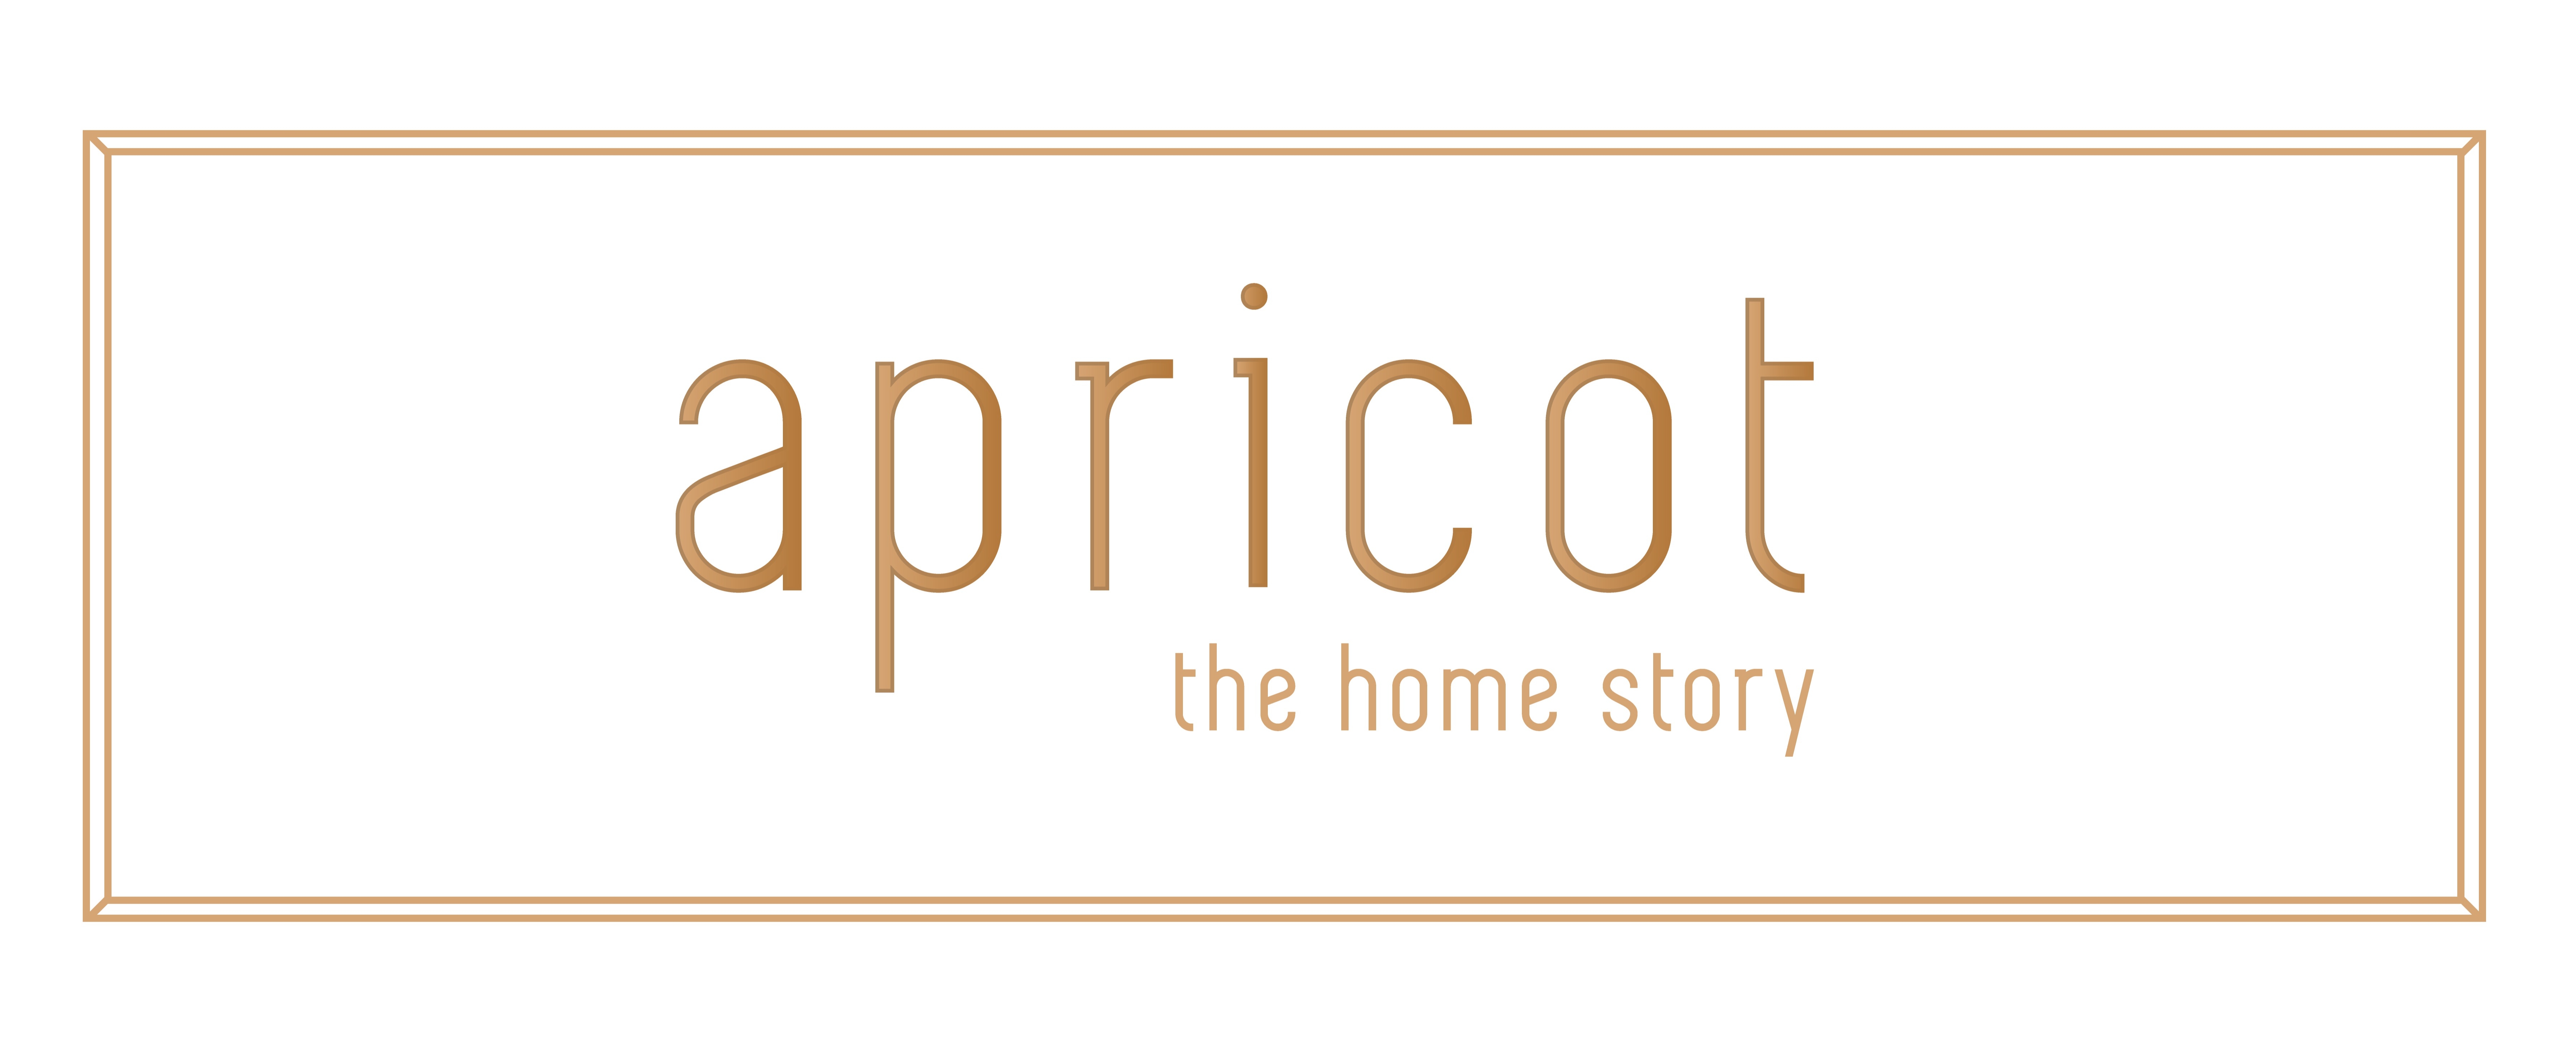 Apricot: The Home Story